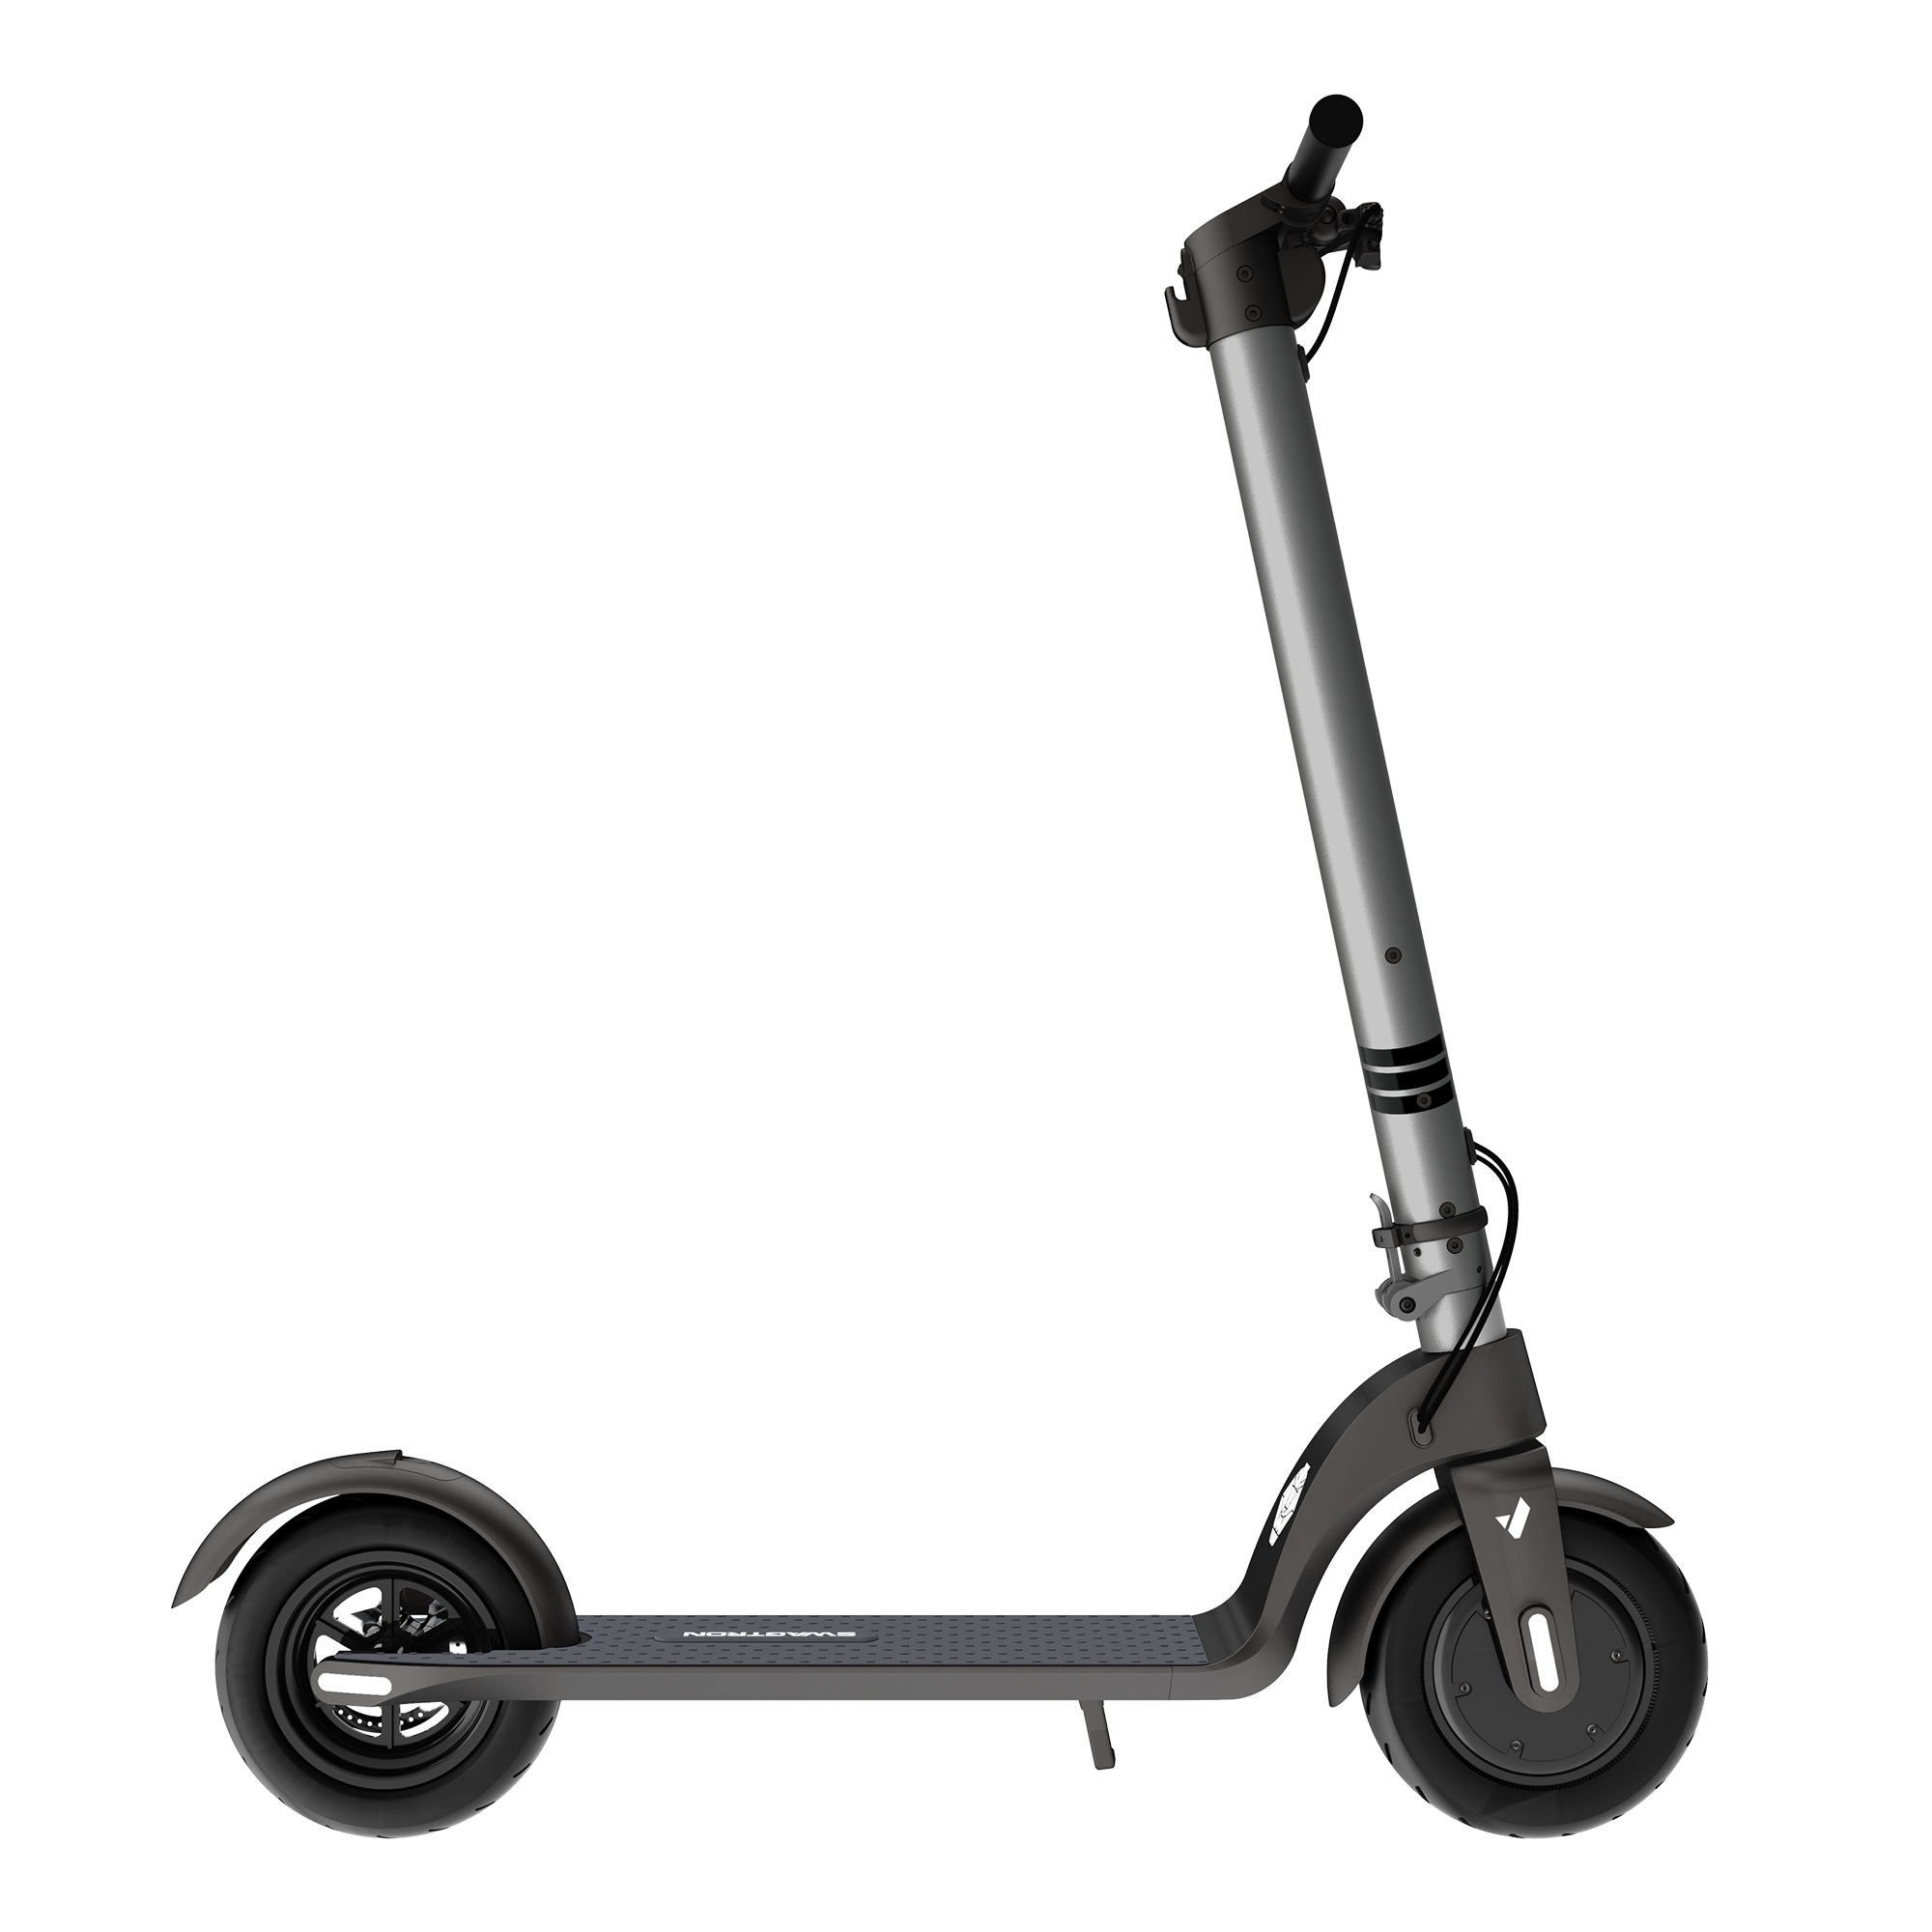 SWAGTRON SWAGGER 7 Folding Electric Kick Scooter with Removable Battery